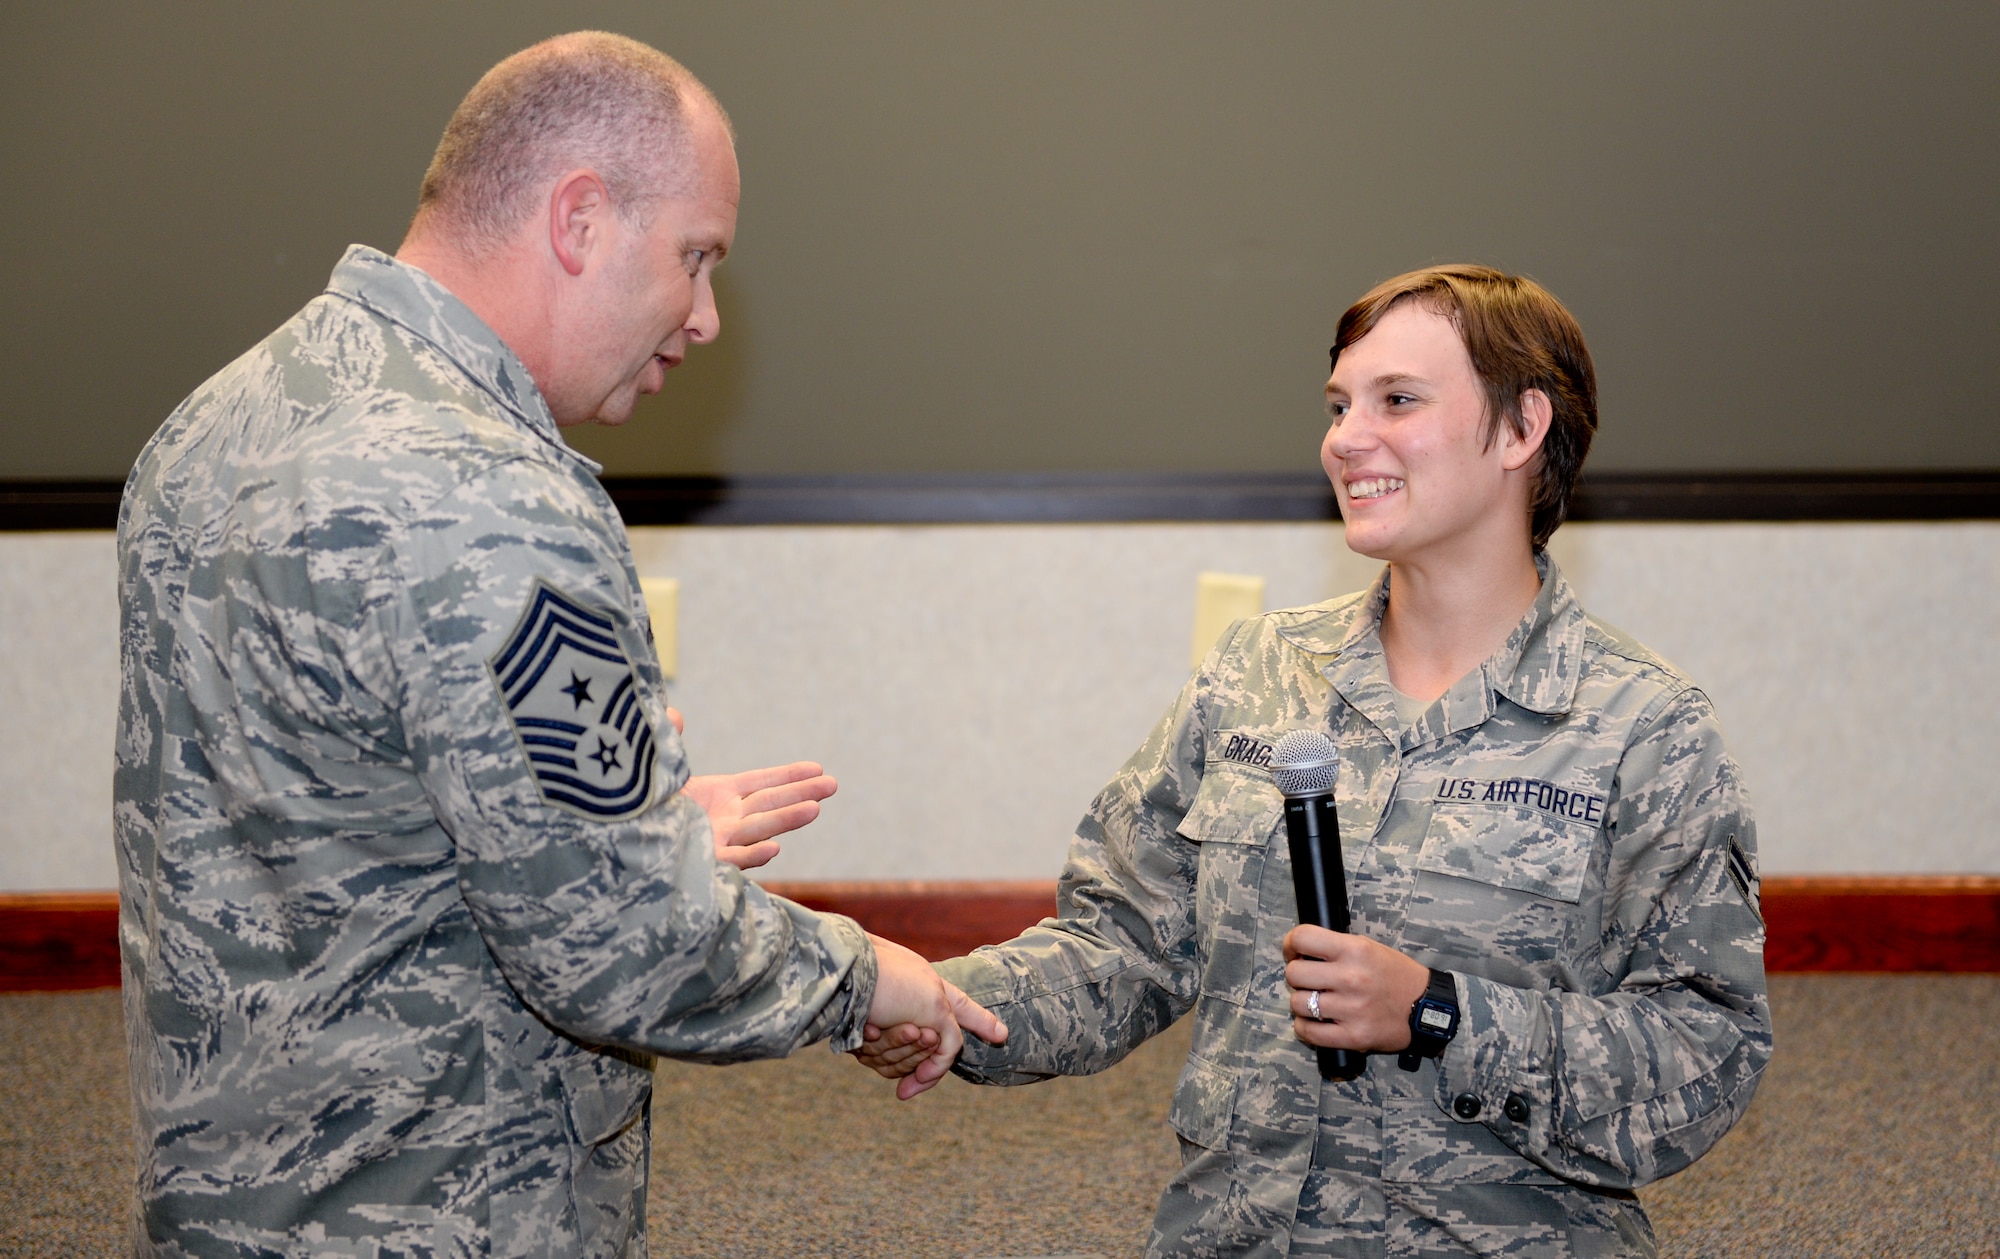 U.S. Air Force Chief Master Sgt. James W. Hotaling, Air National Guard command chief, recognizes Airman 1st Class Willow Gragg, 116th Security Forces Squadron, Georgia Air National Guard, as being one of the 116th Air Control Wing’s newest Guardsman during an enlisted all call at Robins Air Force Base, Ga., July 16, 2015. During his visit, Hotaling conducted two town hall style meetings and met with key enlisted leadership councils and Airmen resiliency representatives. His time with the Airmen focused on sharing his message of a renewed commitment to the profession of arms, health of the force, and recognition of our Airmen and accomplishments. The visit offered the opportunity for Airmen in the wing to meet their top leader, share their concerns and gain perspective from the national level. (U.S. Air National Guard photo by Tech. Sgt. Regina Young/Released)